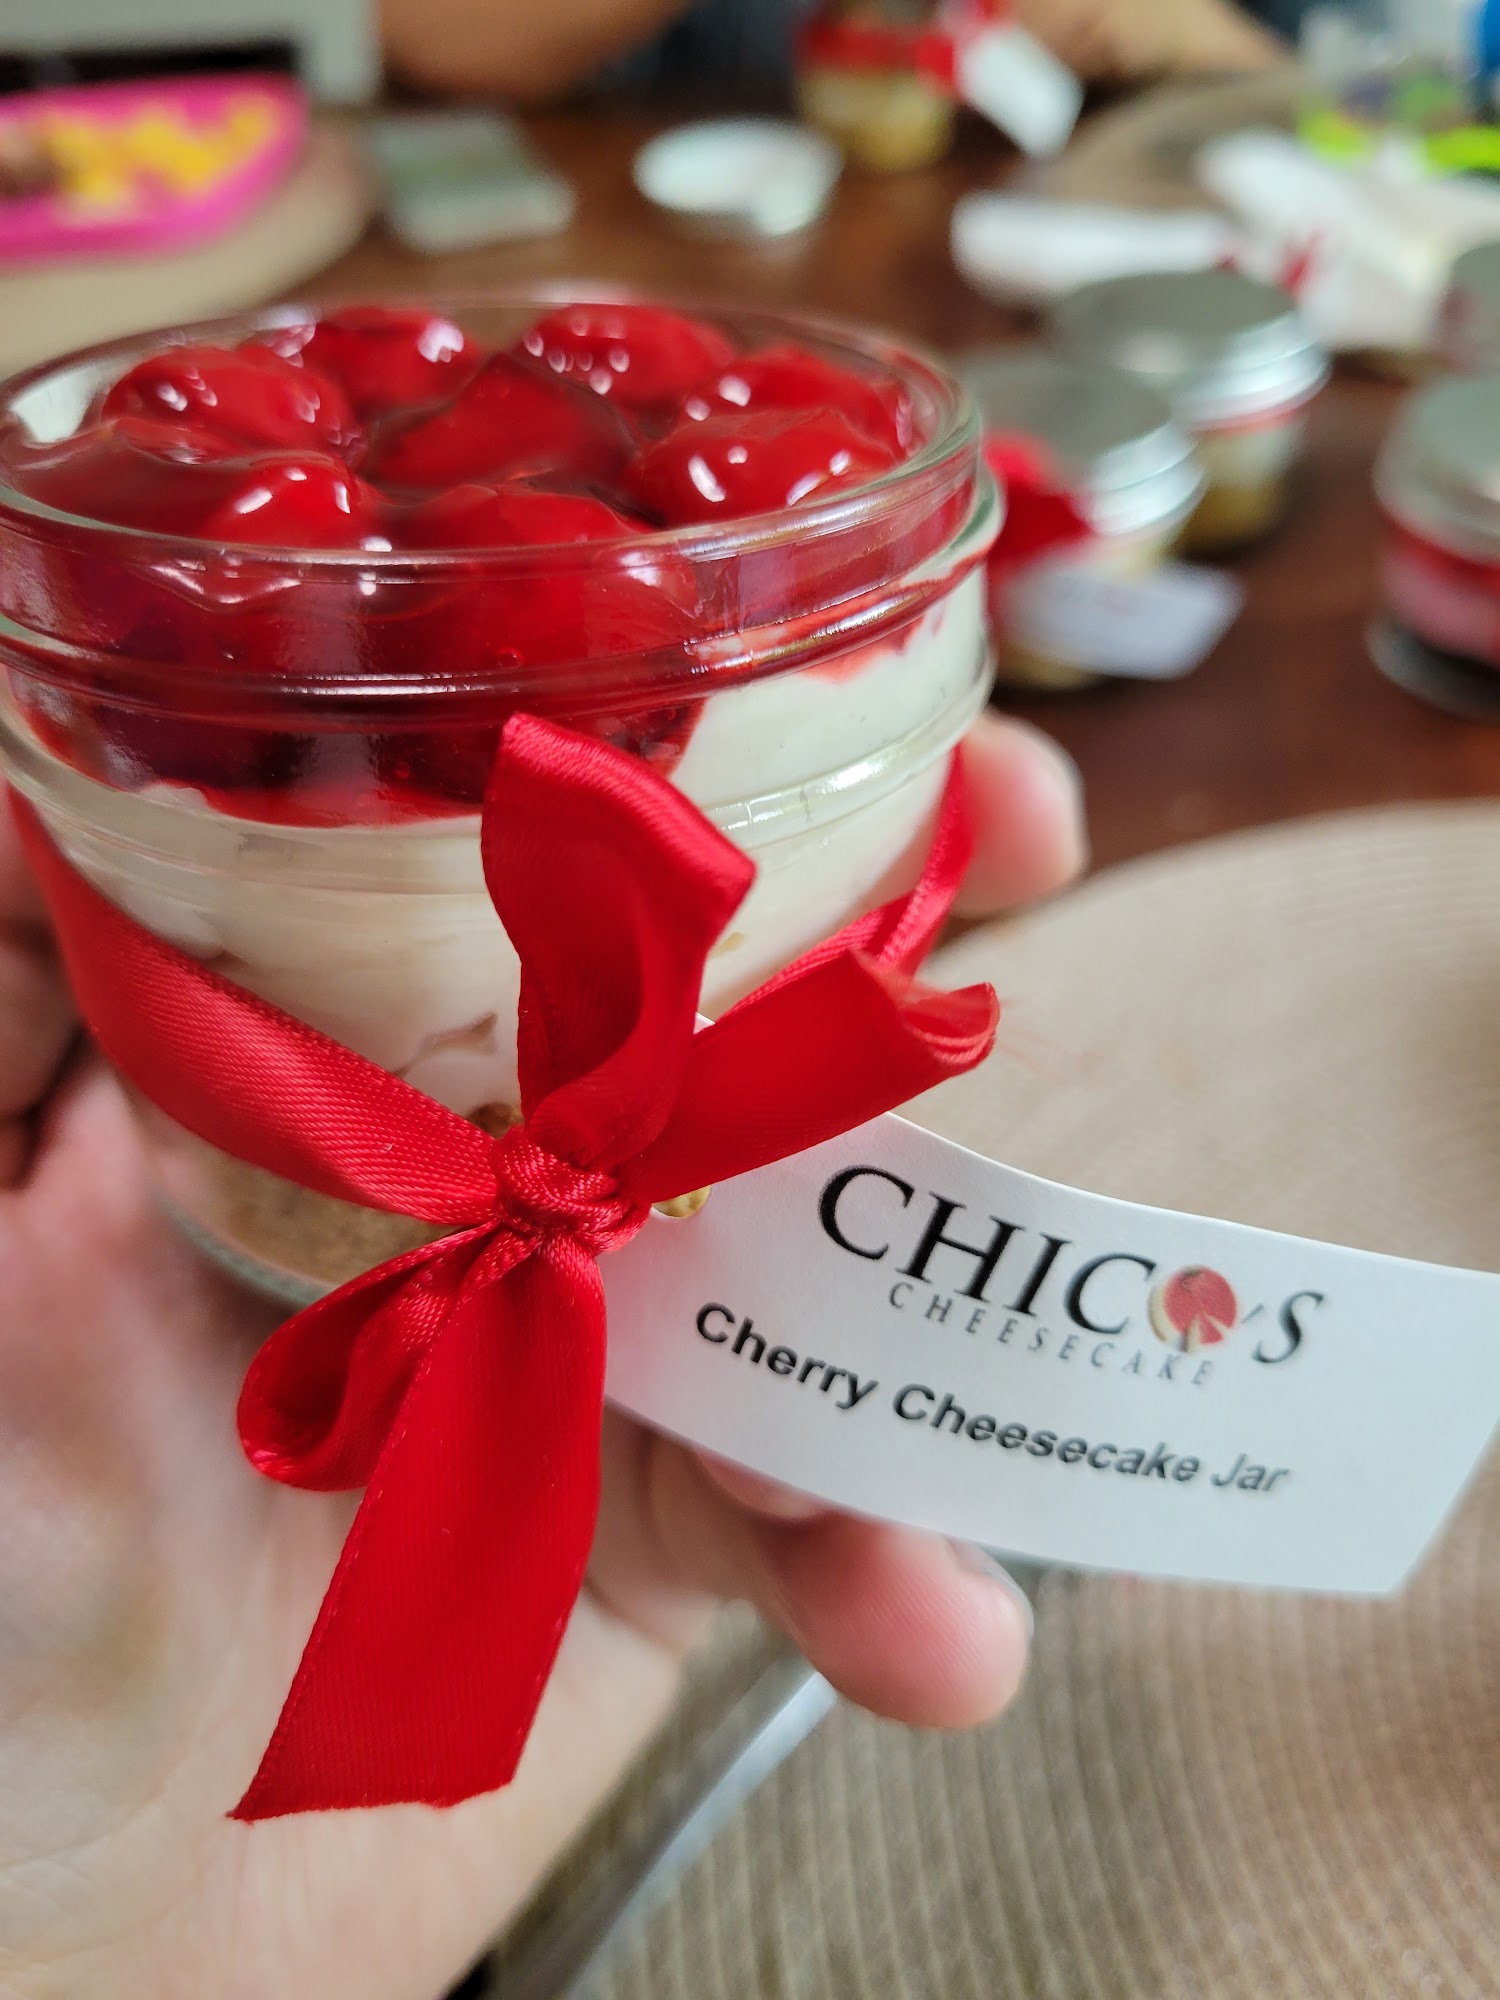 Chico's Cheesecakes (Online Bakery)